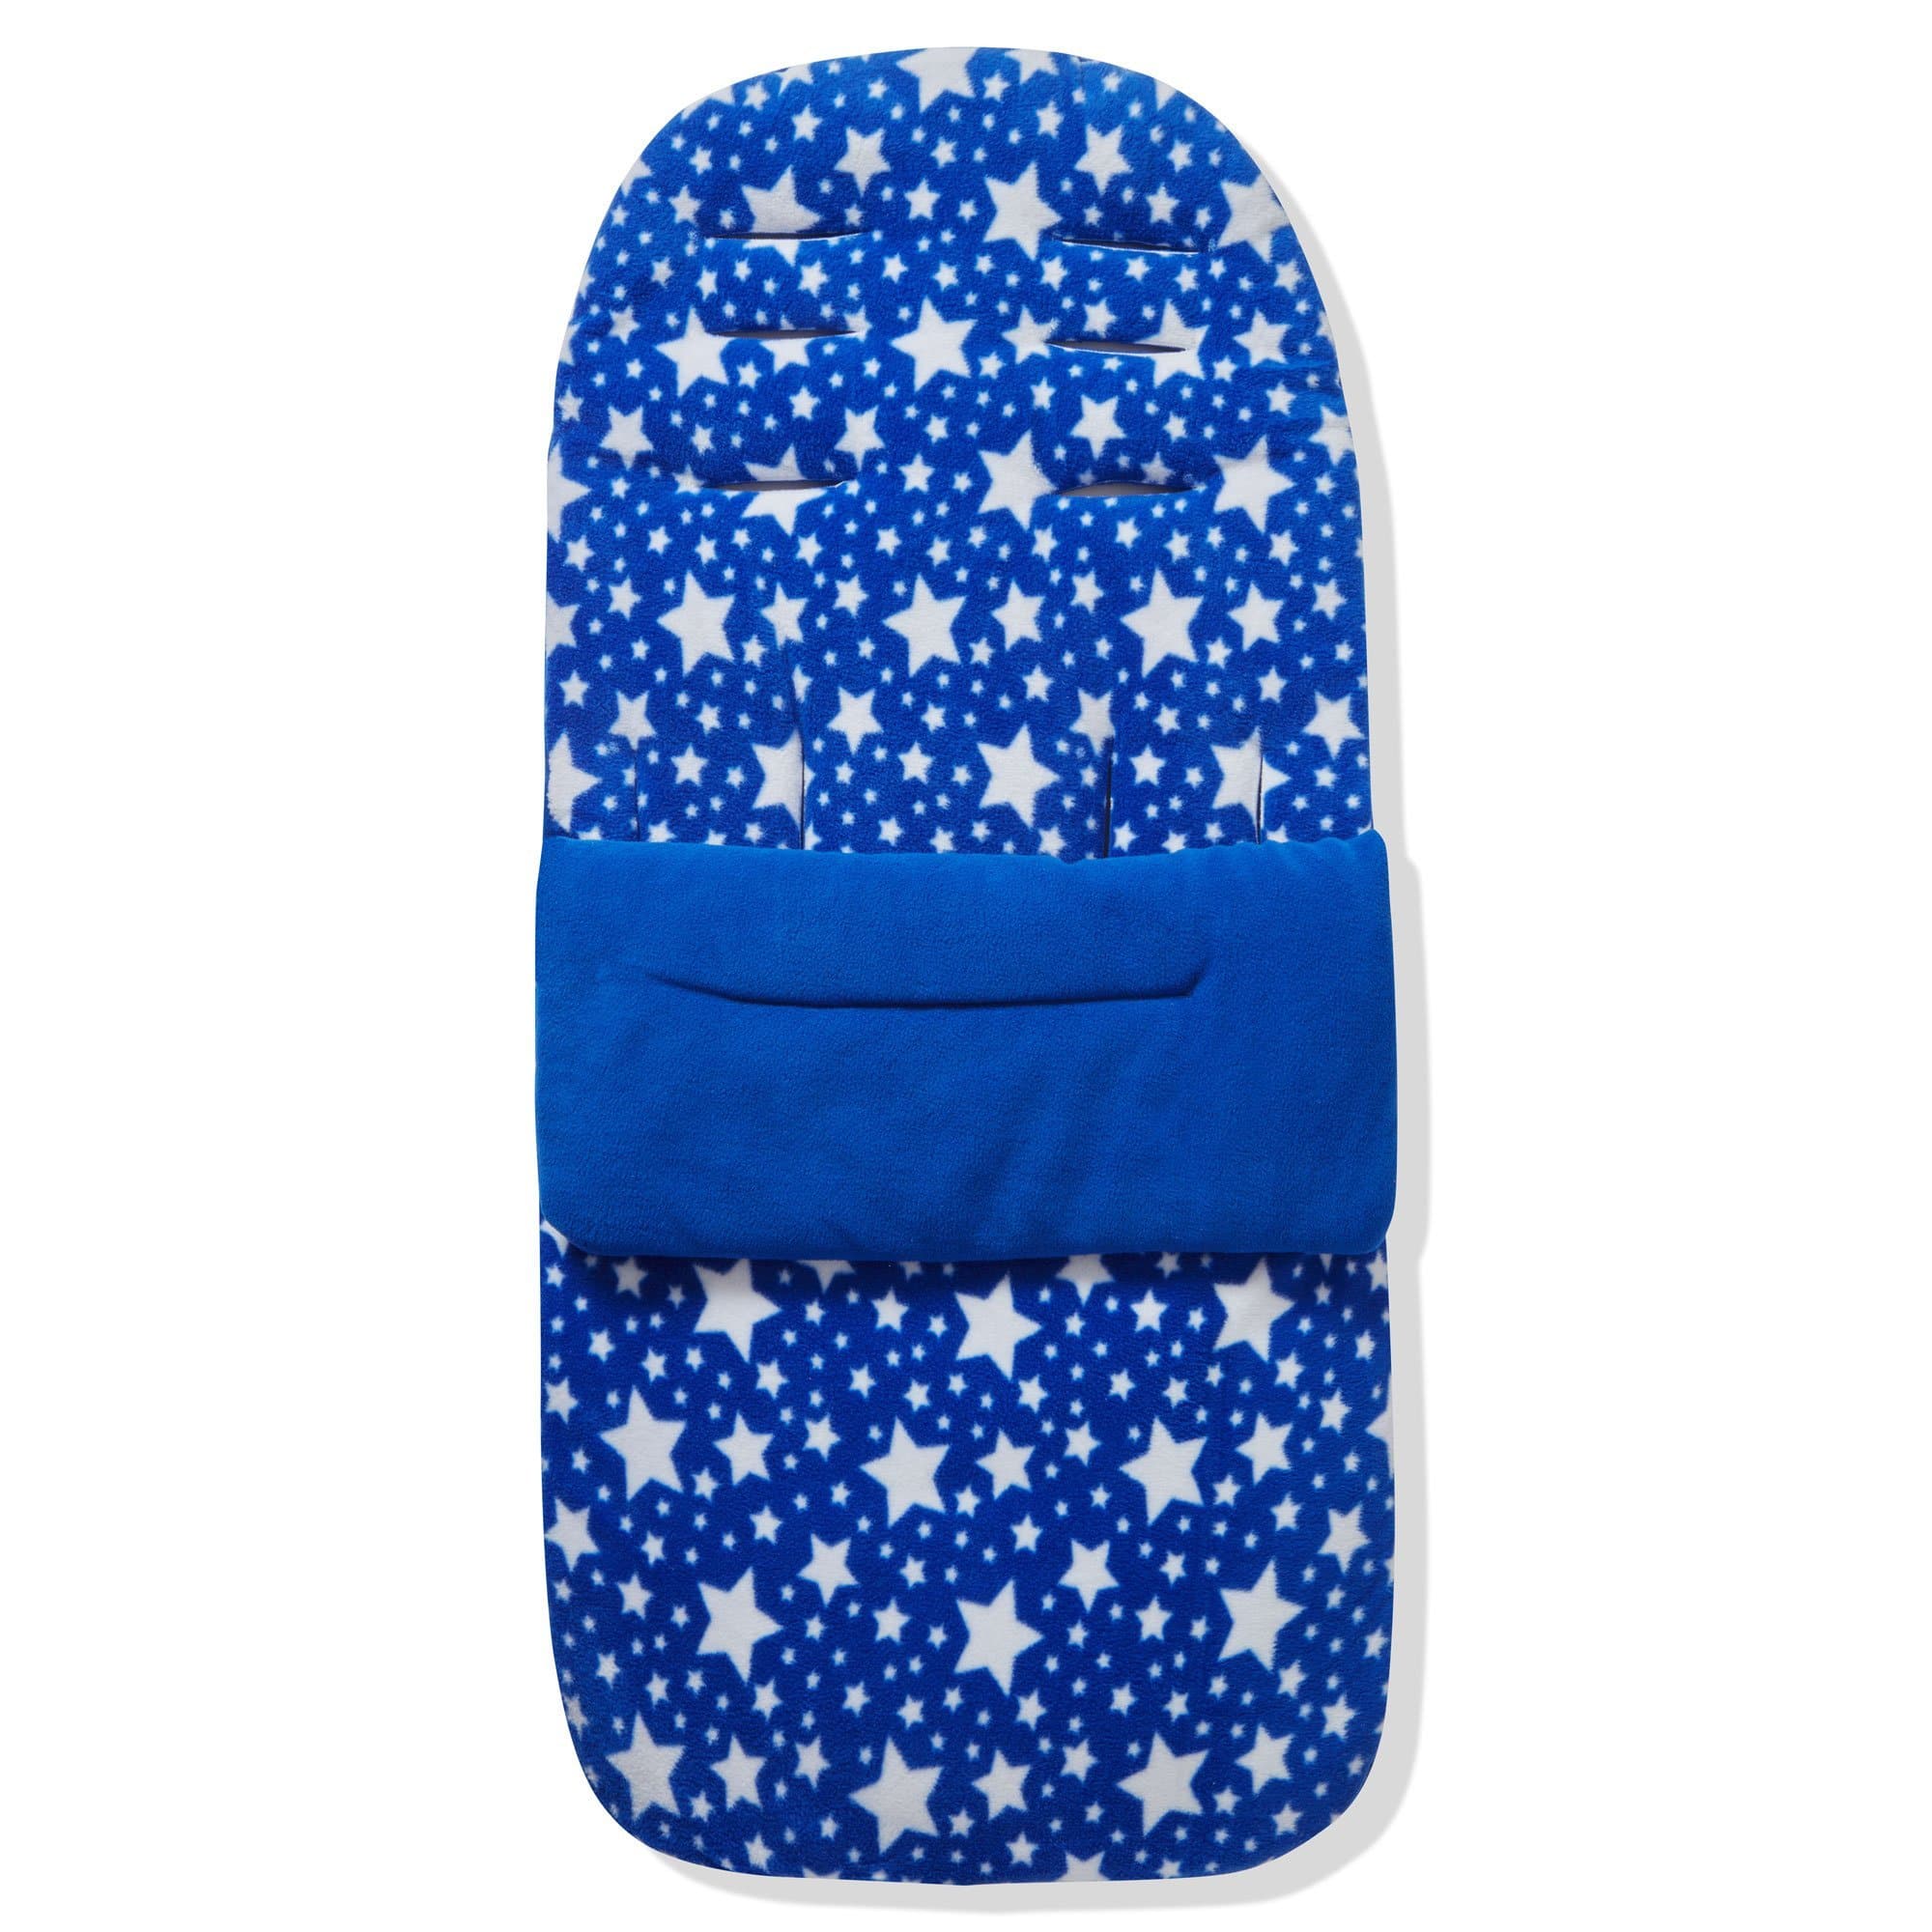 Fleece Footmuff / Cosy Toes Compatible with GB - Blue Star / Fits All Models | For Your Little One